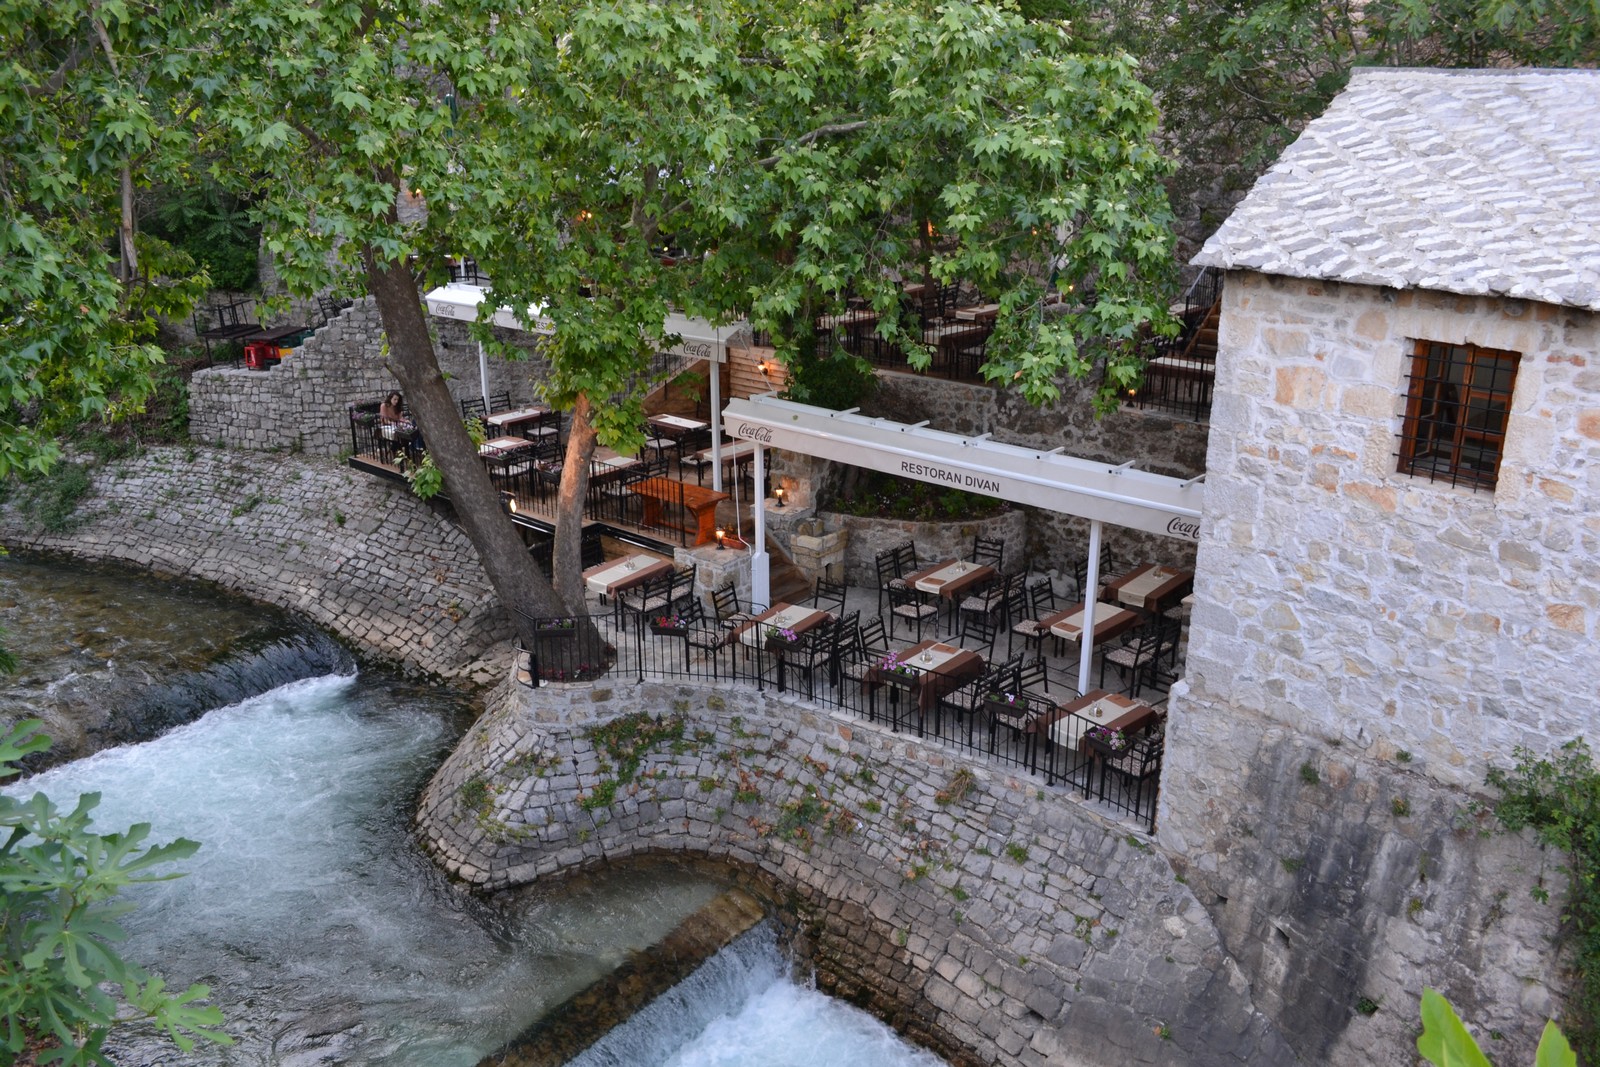 Restaurant terrace with a tree on side and a view on the river. Enclosed by cement walls built in old style.